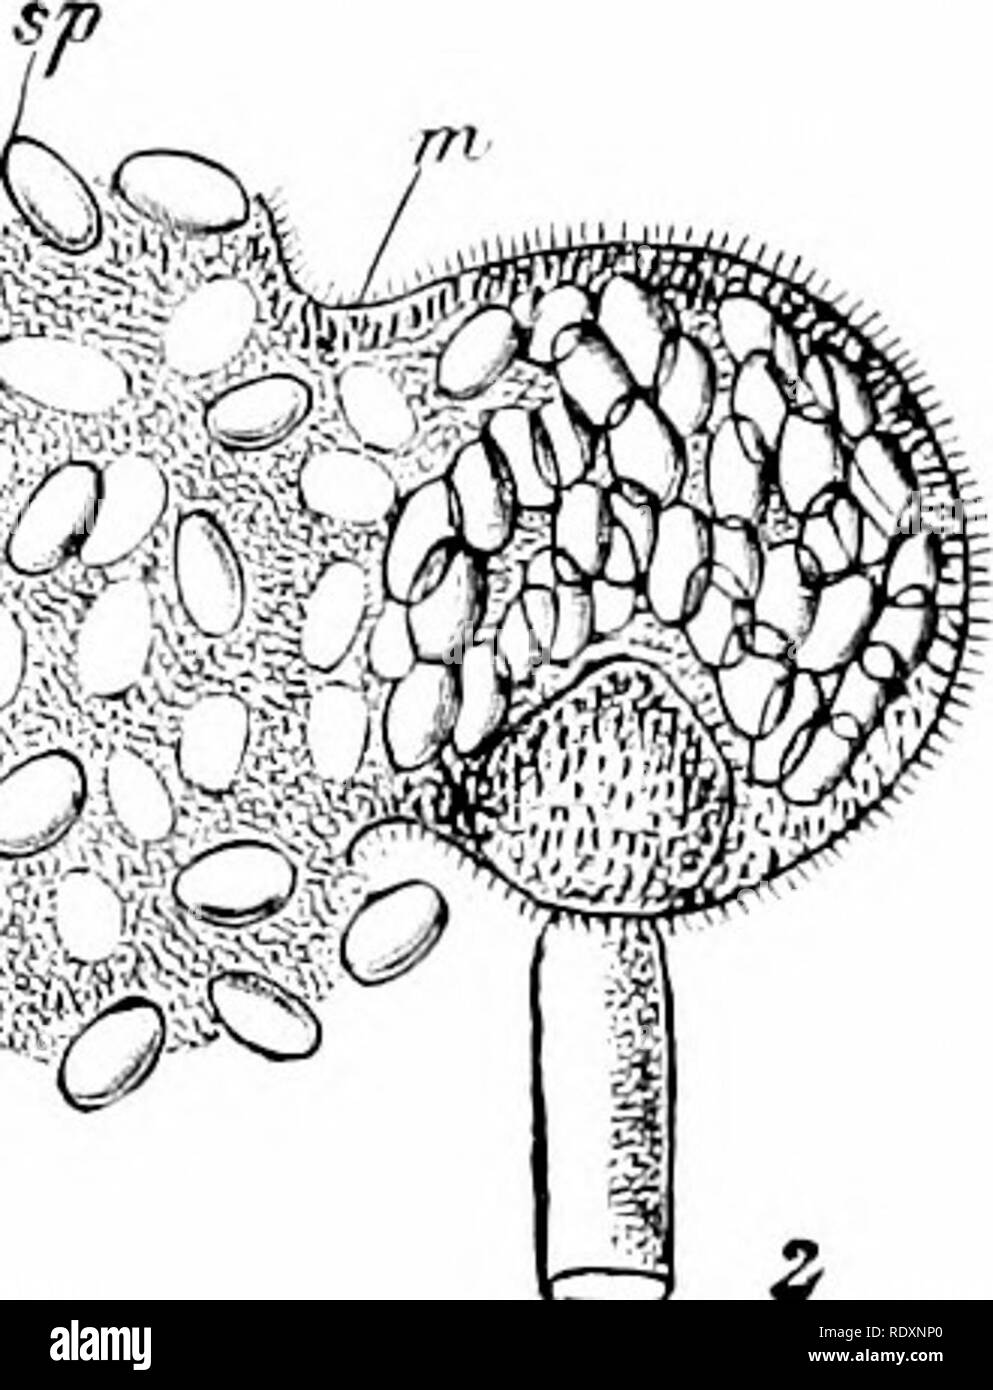 . Botany of the living plant. Botany. C .; ^. ^^^.^ Fig. 360. I, Mucor nutcedo, a sporangium in optical longitudinal section. c=columella. »i —wall of sporangium. s/&gt; = spores. 2. Mucor miictlagineus, a sporangium shedding its spores; the wall (m) is ruptured, and the mucilaginous matri.x (r) is greatly swollen. (After Brefeld. i x 225 ; 2 x 300, after v. Tavel.) (From Strasburger.) stalk, which has become turgid with sap under osmotic pressure. By the principle of the squirt this fluid is thrown out to a distance of some inches, carrying mth it the sporangial head. A similar projection hap Stock Photo